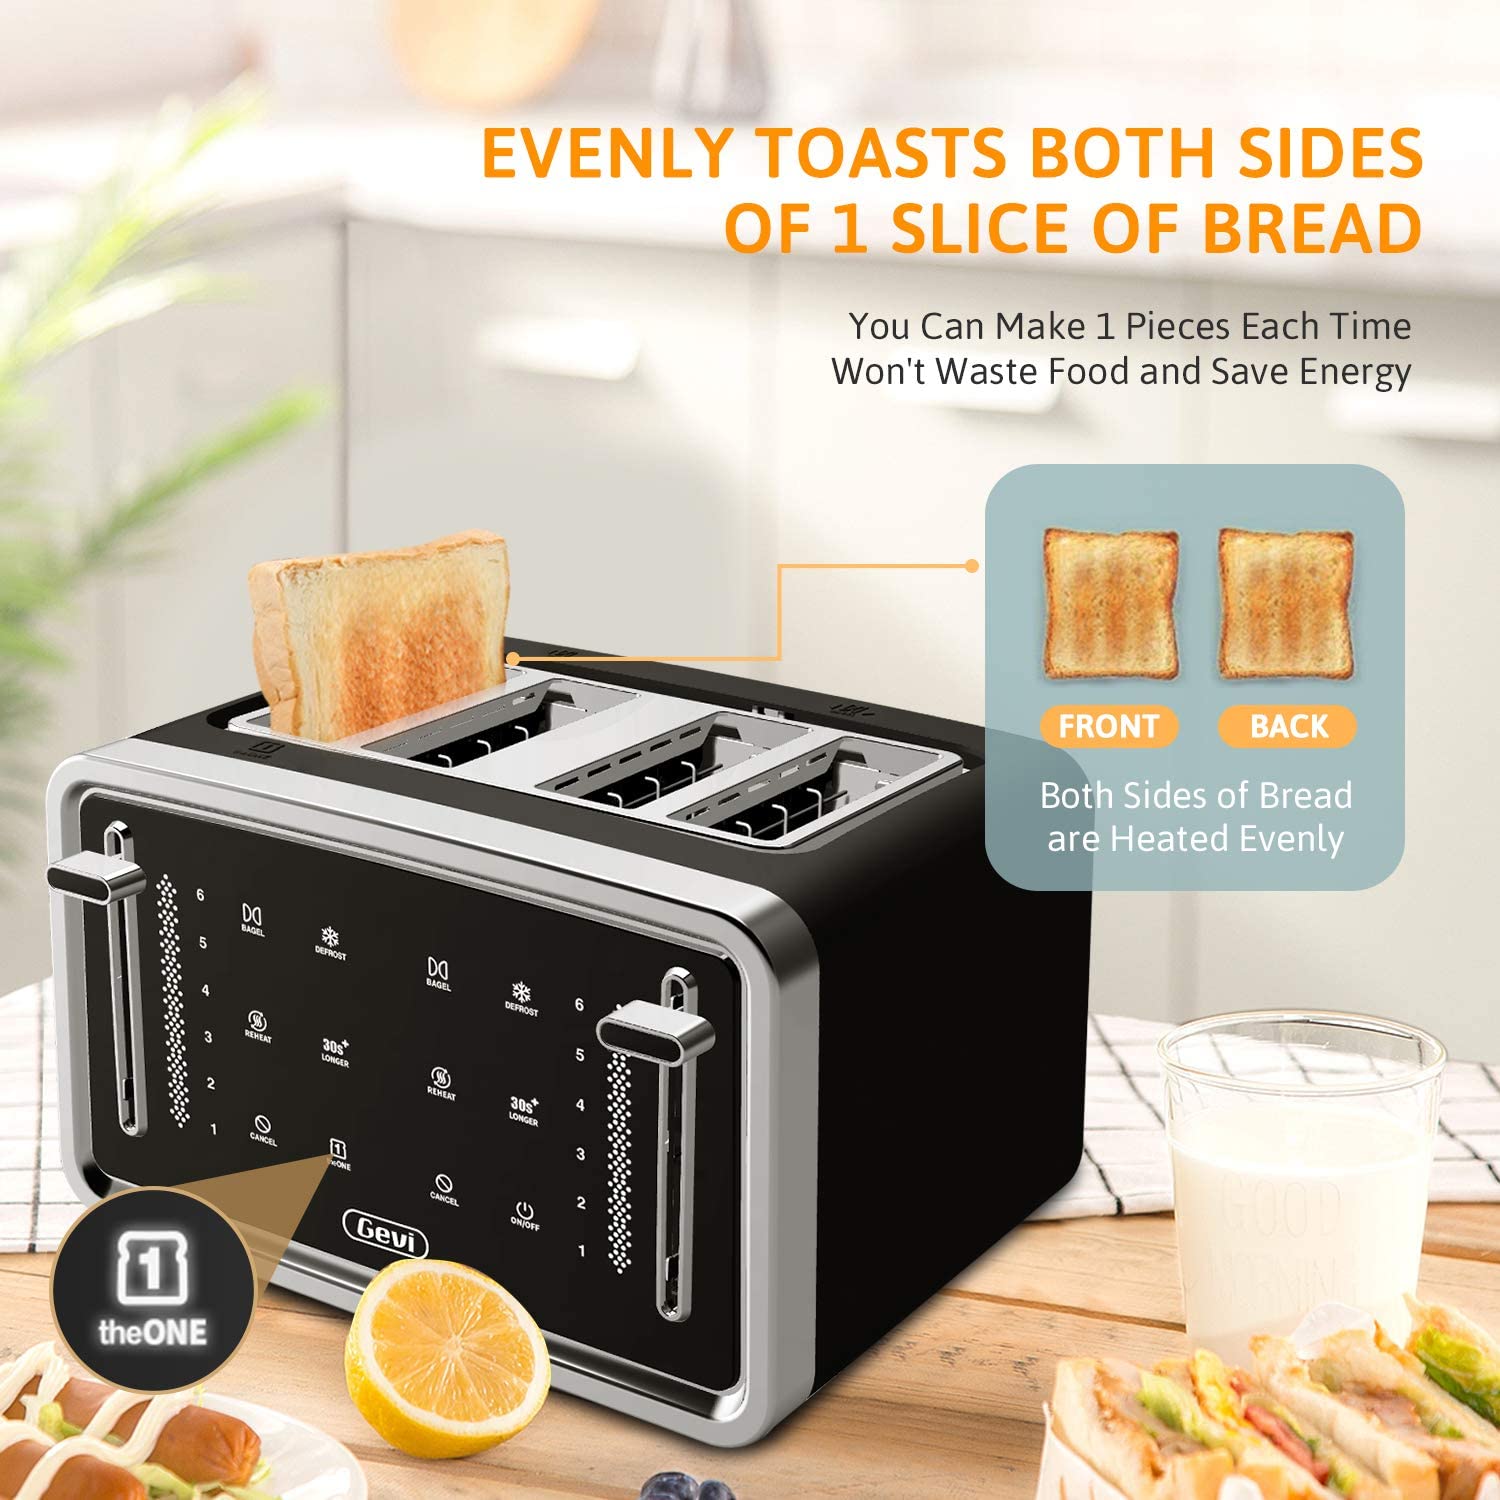 Led Display Touchscreen Bagel Toaster